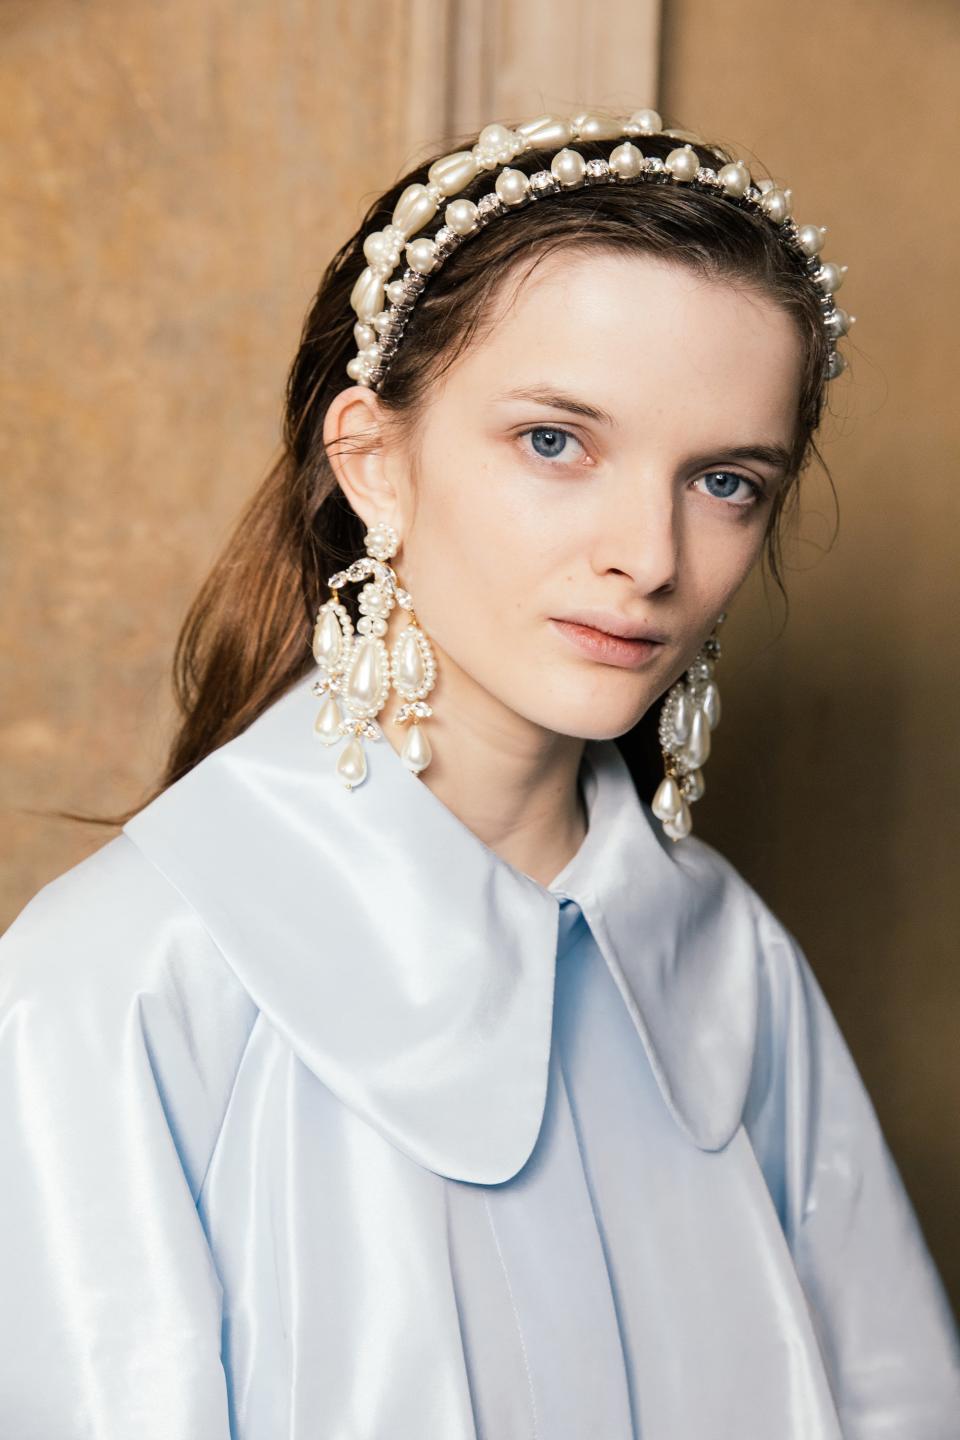 Simone Rocha’s hair-accessory kick was alive and well at London Fashion Week, where the designer crowned fashion muse Chloë Sevigny and model-to-watch Tess McMillan.